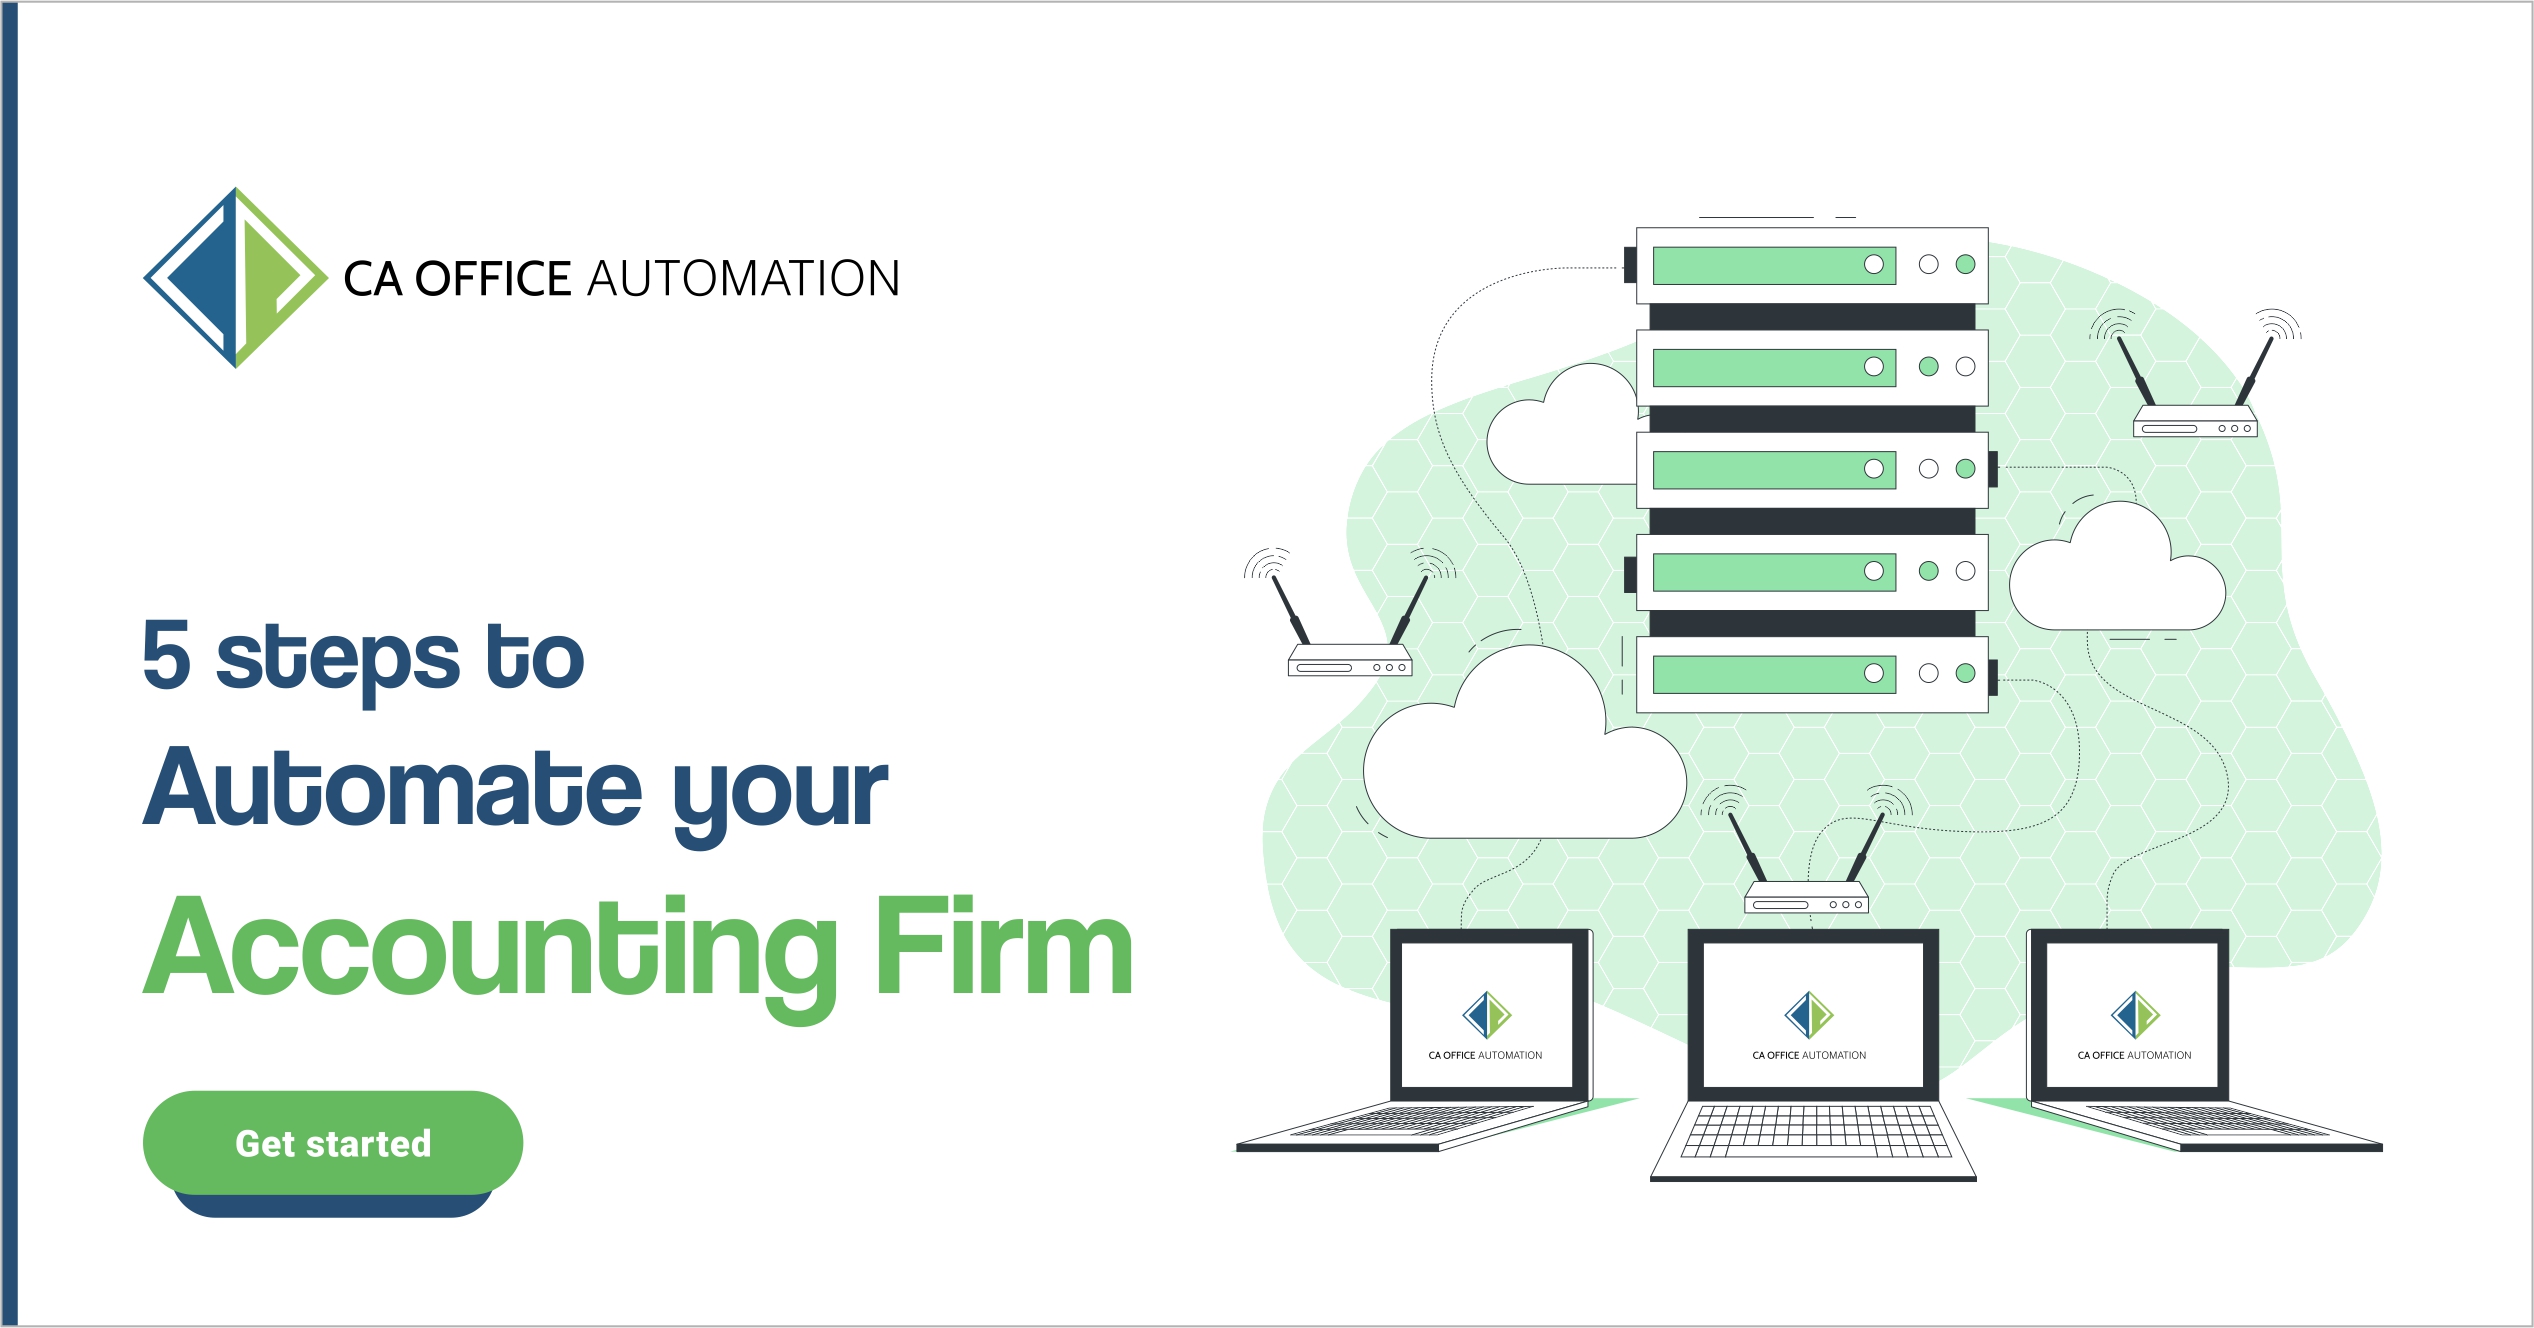 Follow These 5 Steps To Automate Your Accounting Firm’s Process